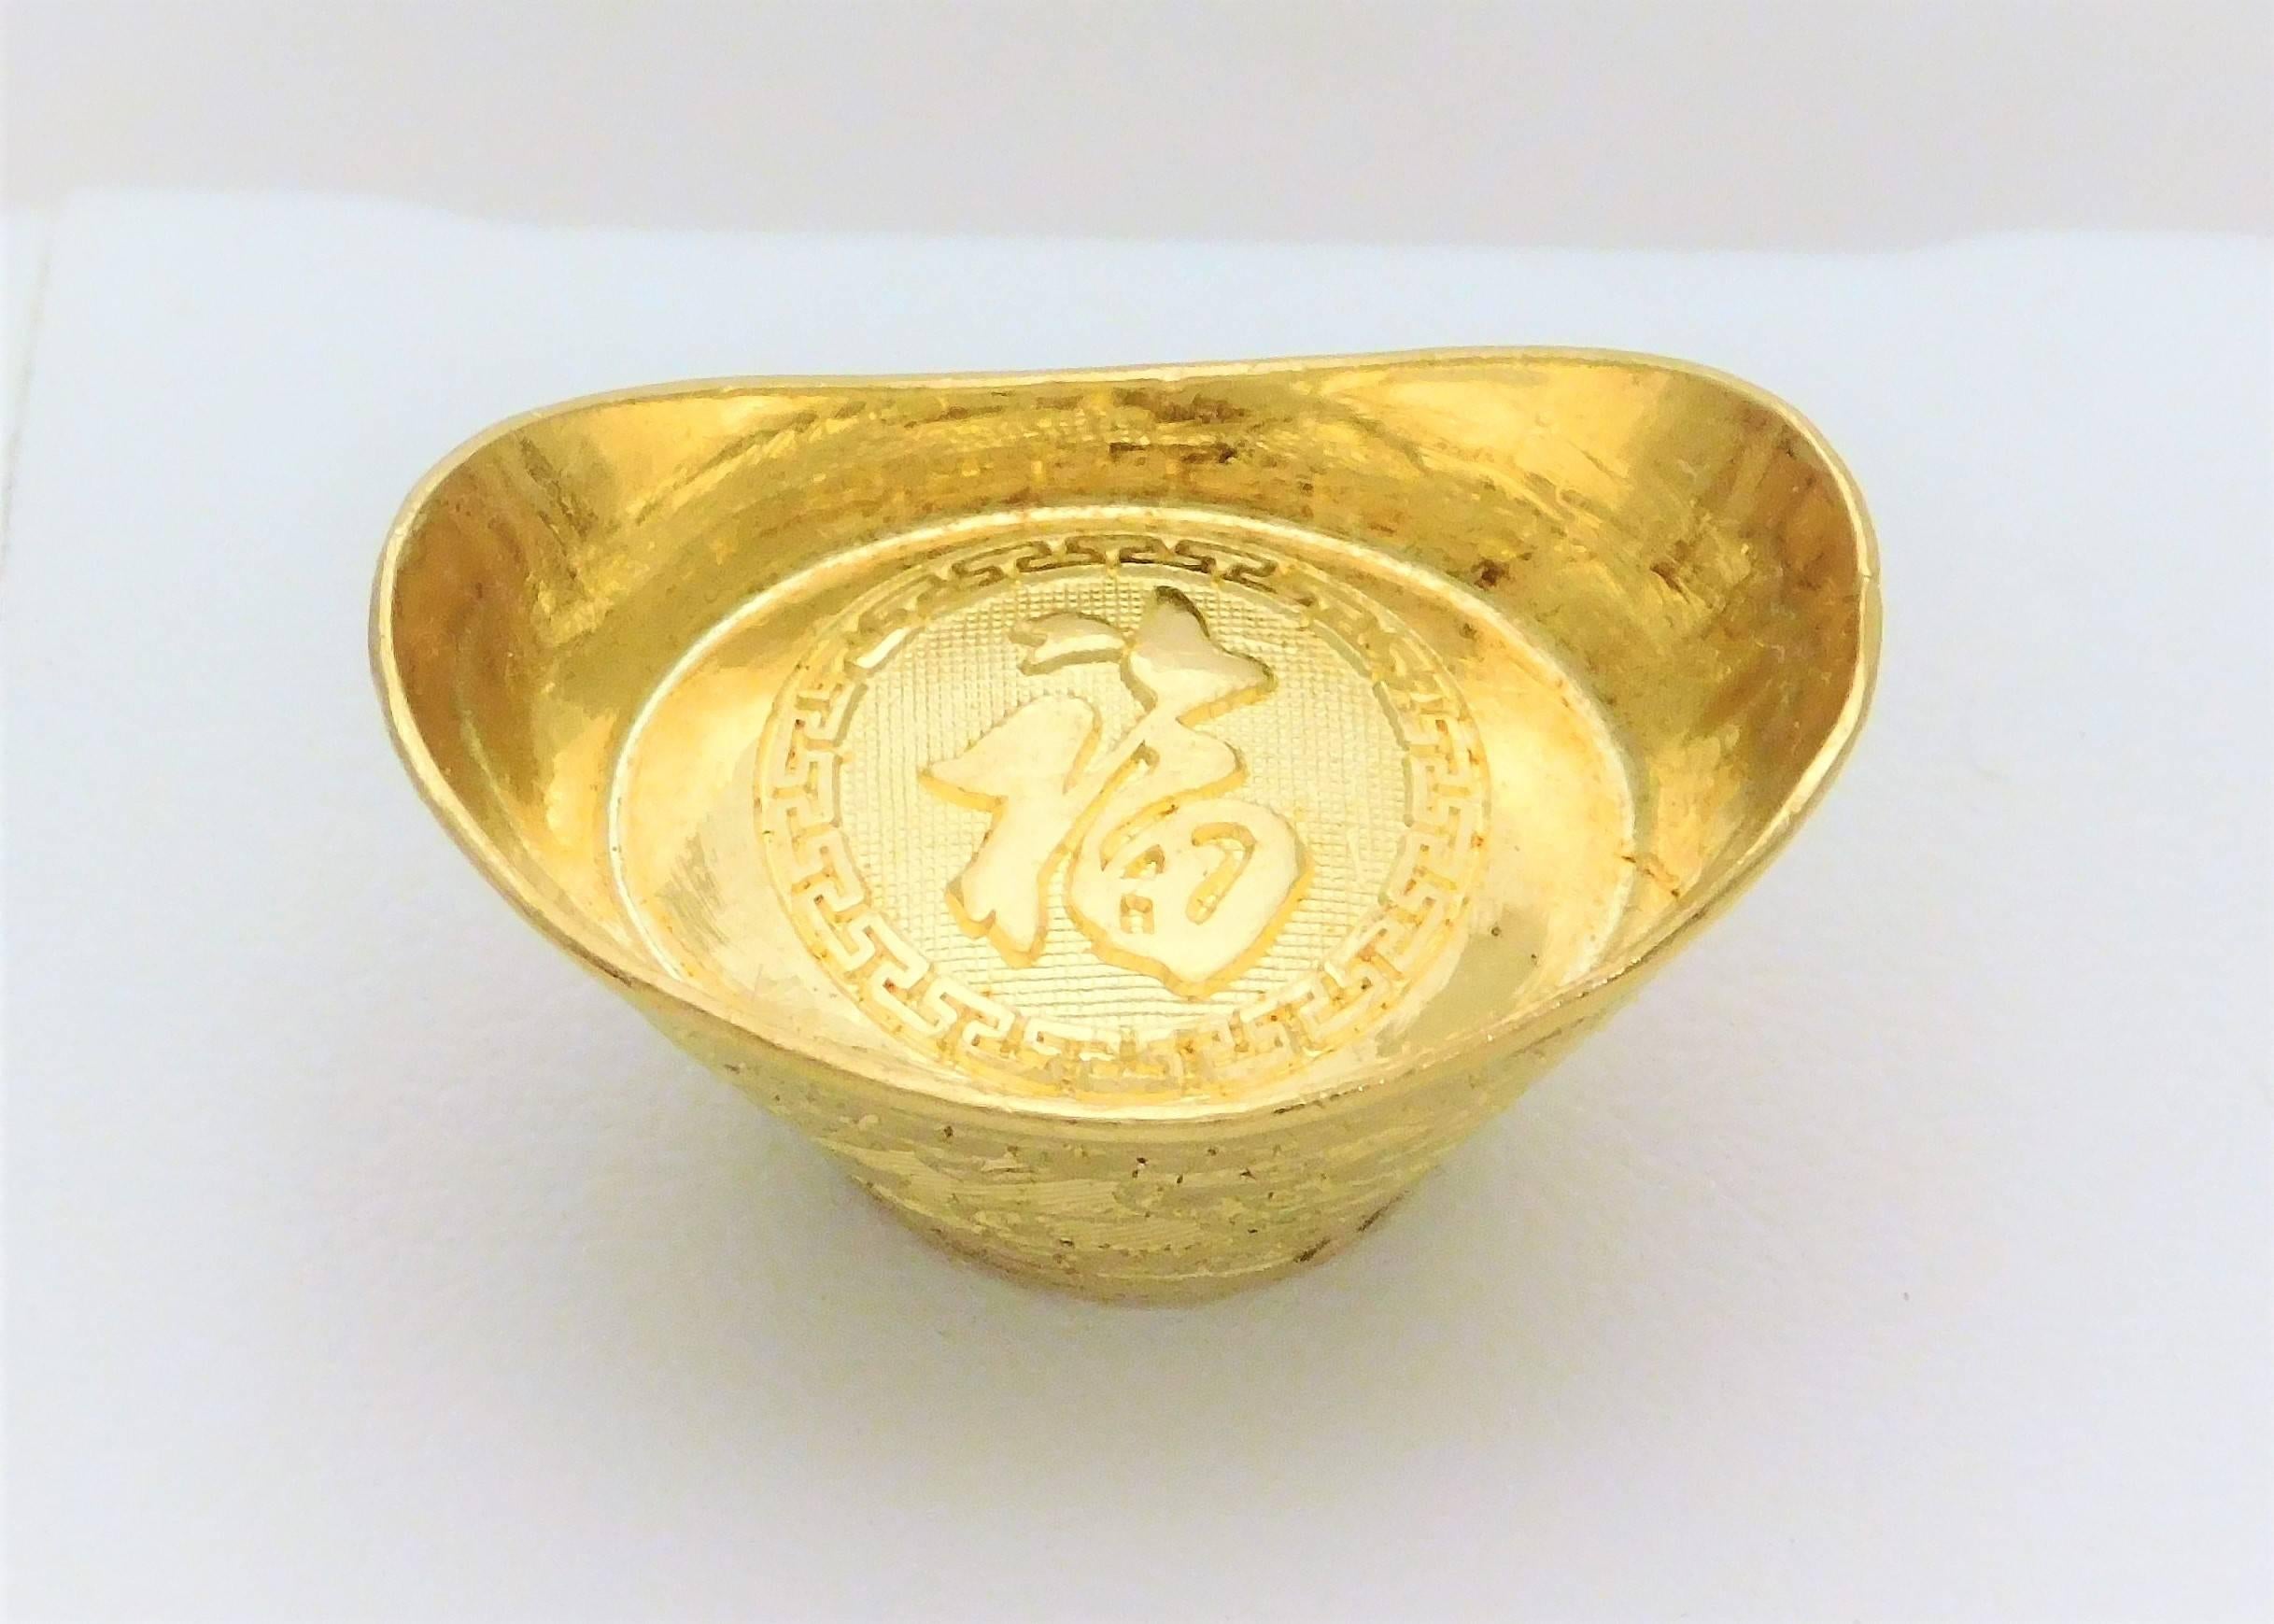 23 Karat Gold “Yuen Bao” Chinese Prosperity Charm In Excellent Condition For Sale In Metairie, LA